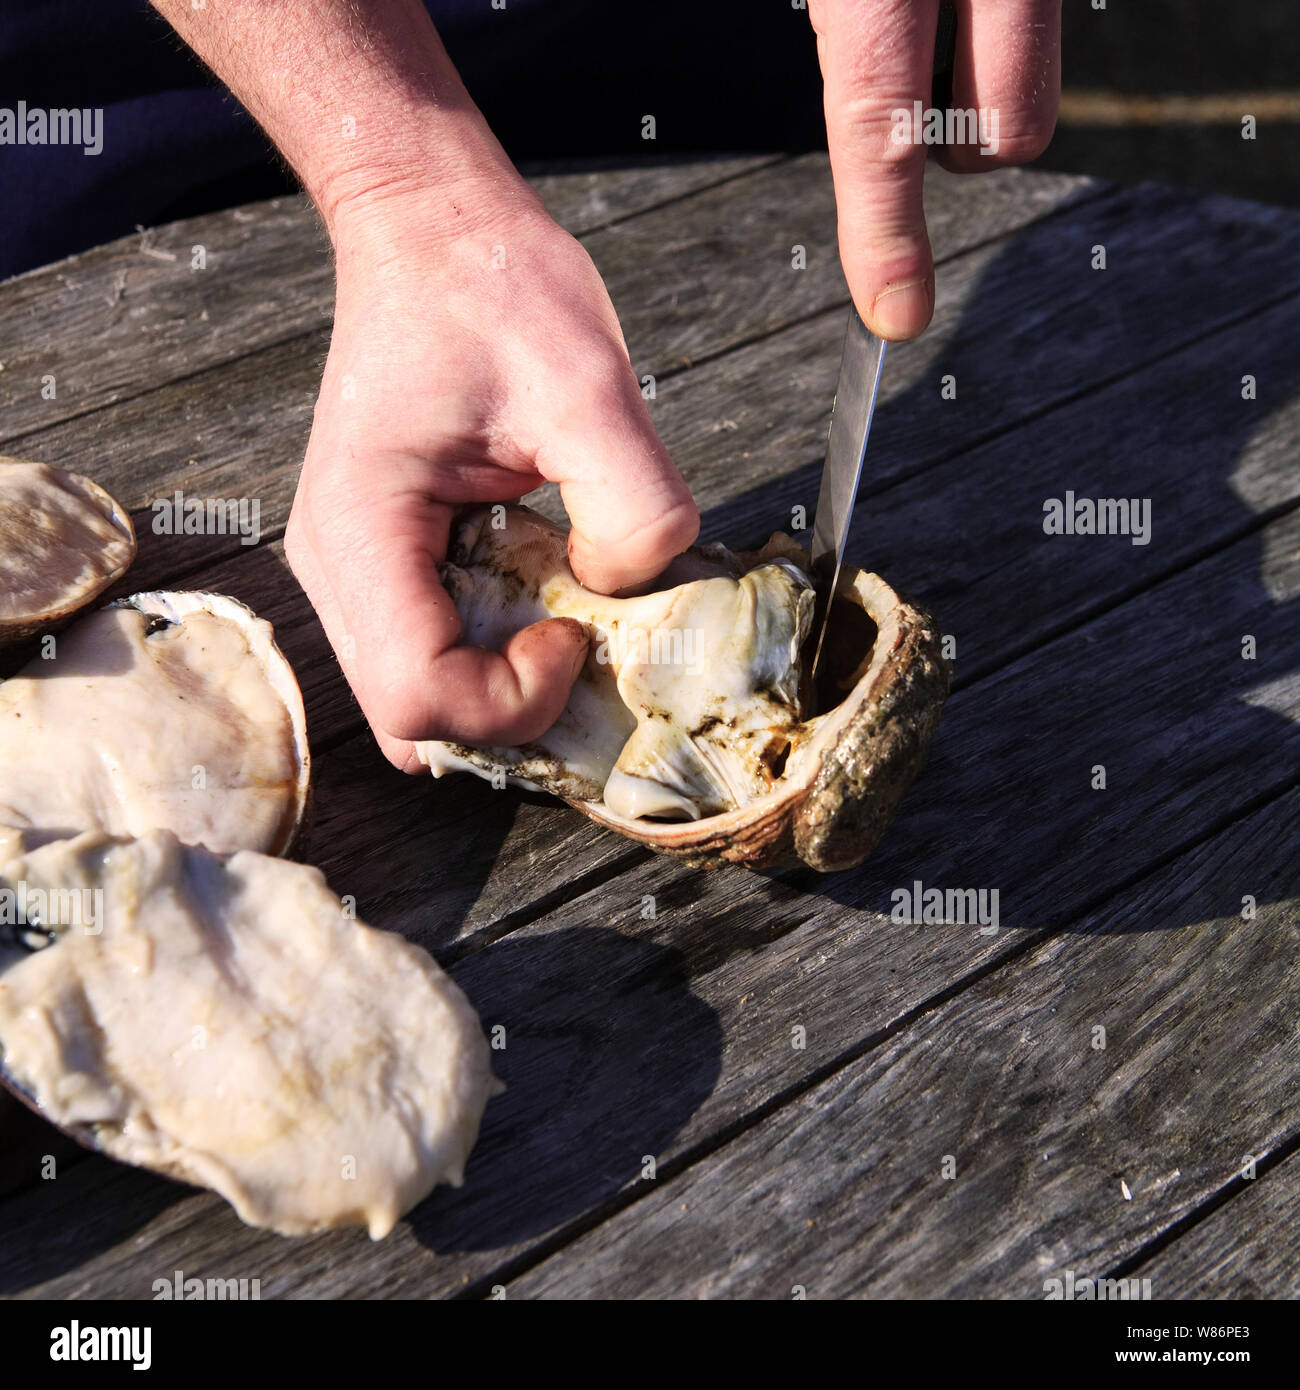 Guernsey Ormers - shellfish from the abalone family - being prepared to be cooked in a stew. Stock Photo